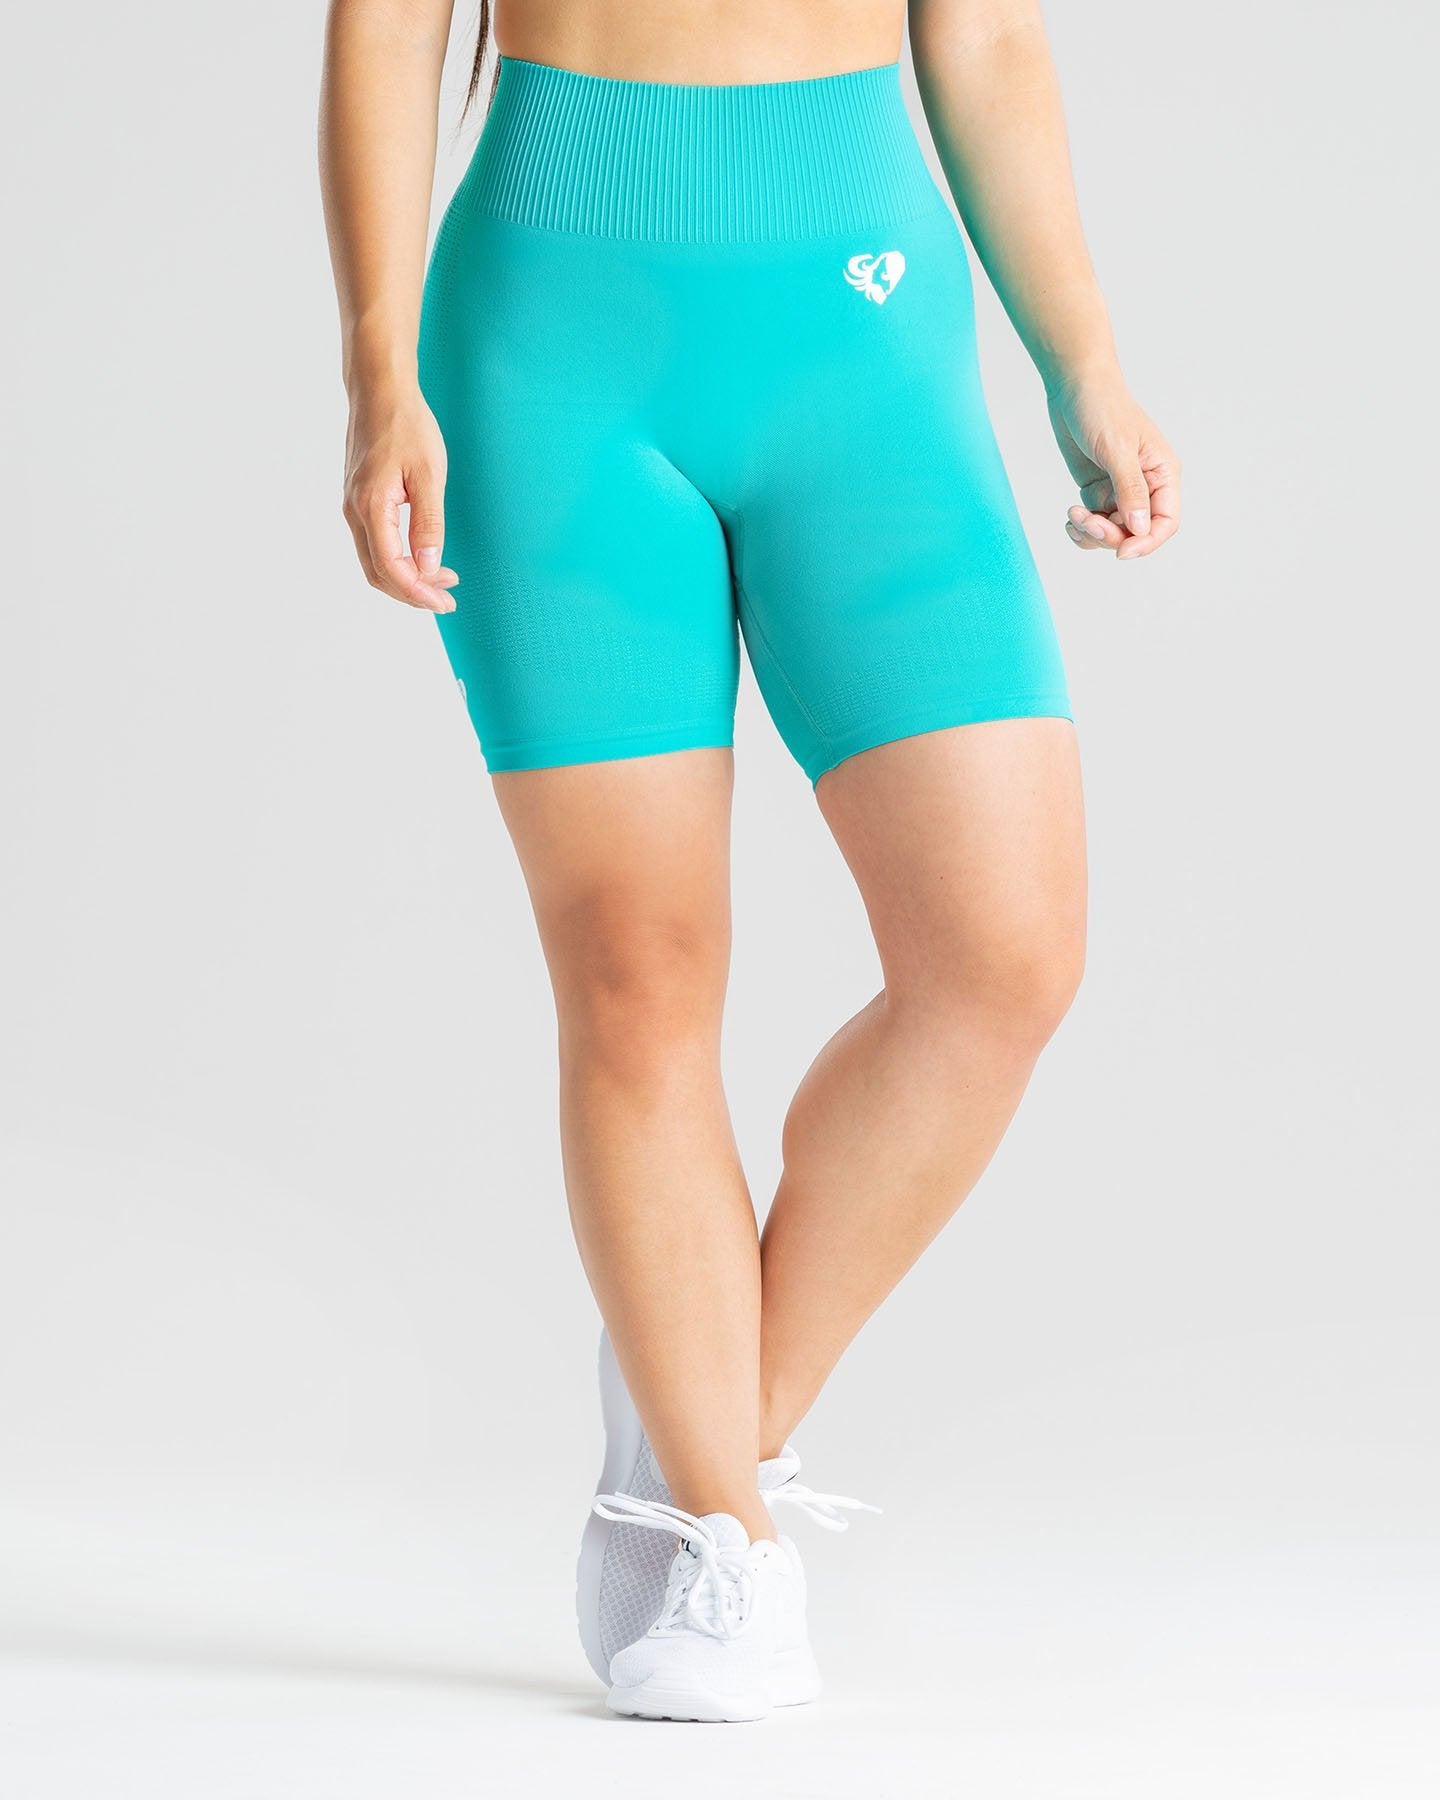 Power Seamless Cycling Shorts - Ceramic Turquoise | Women's Best